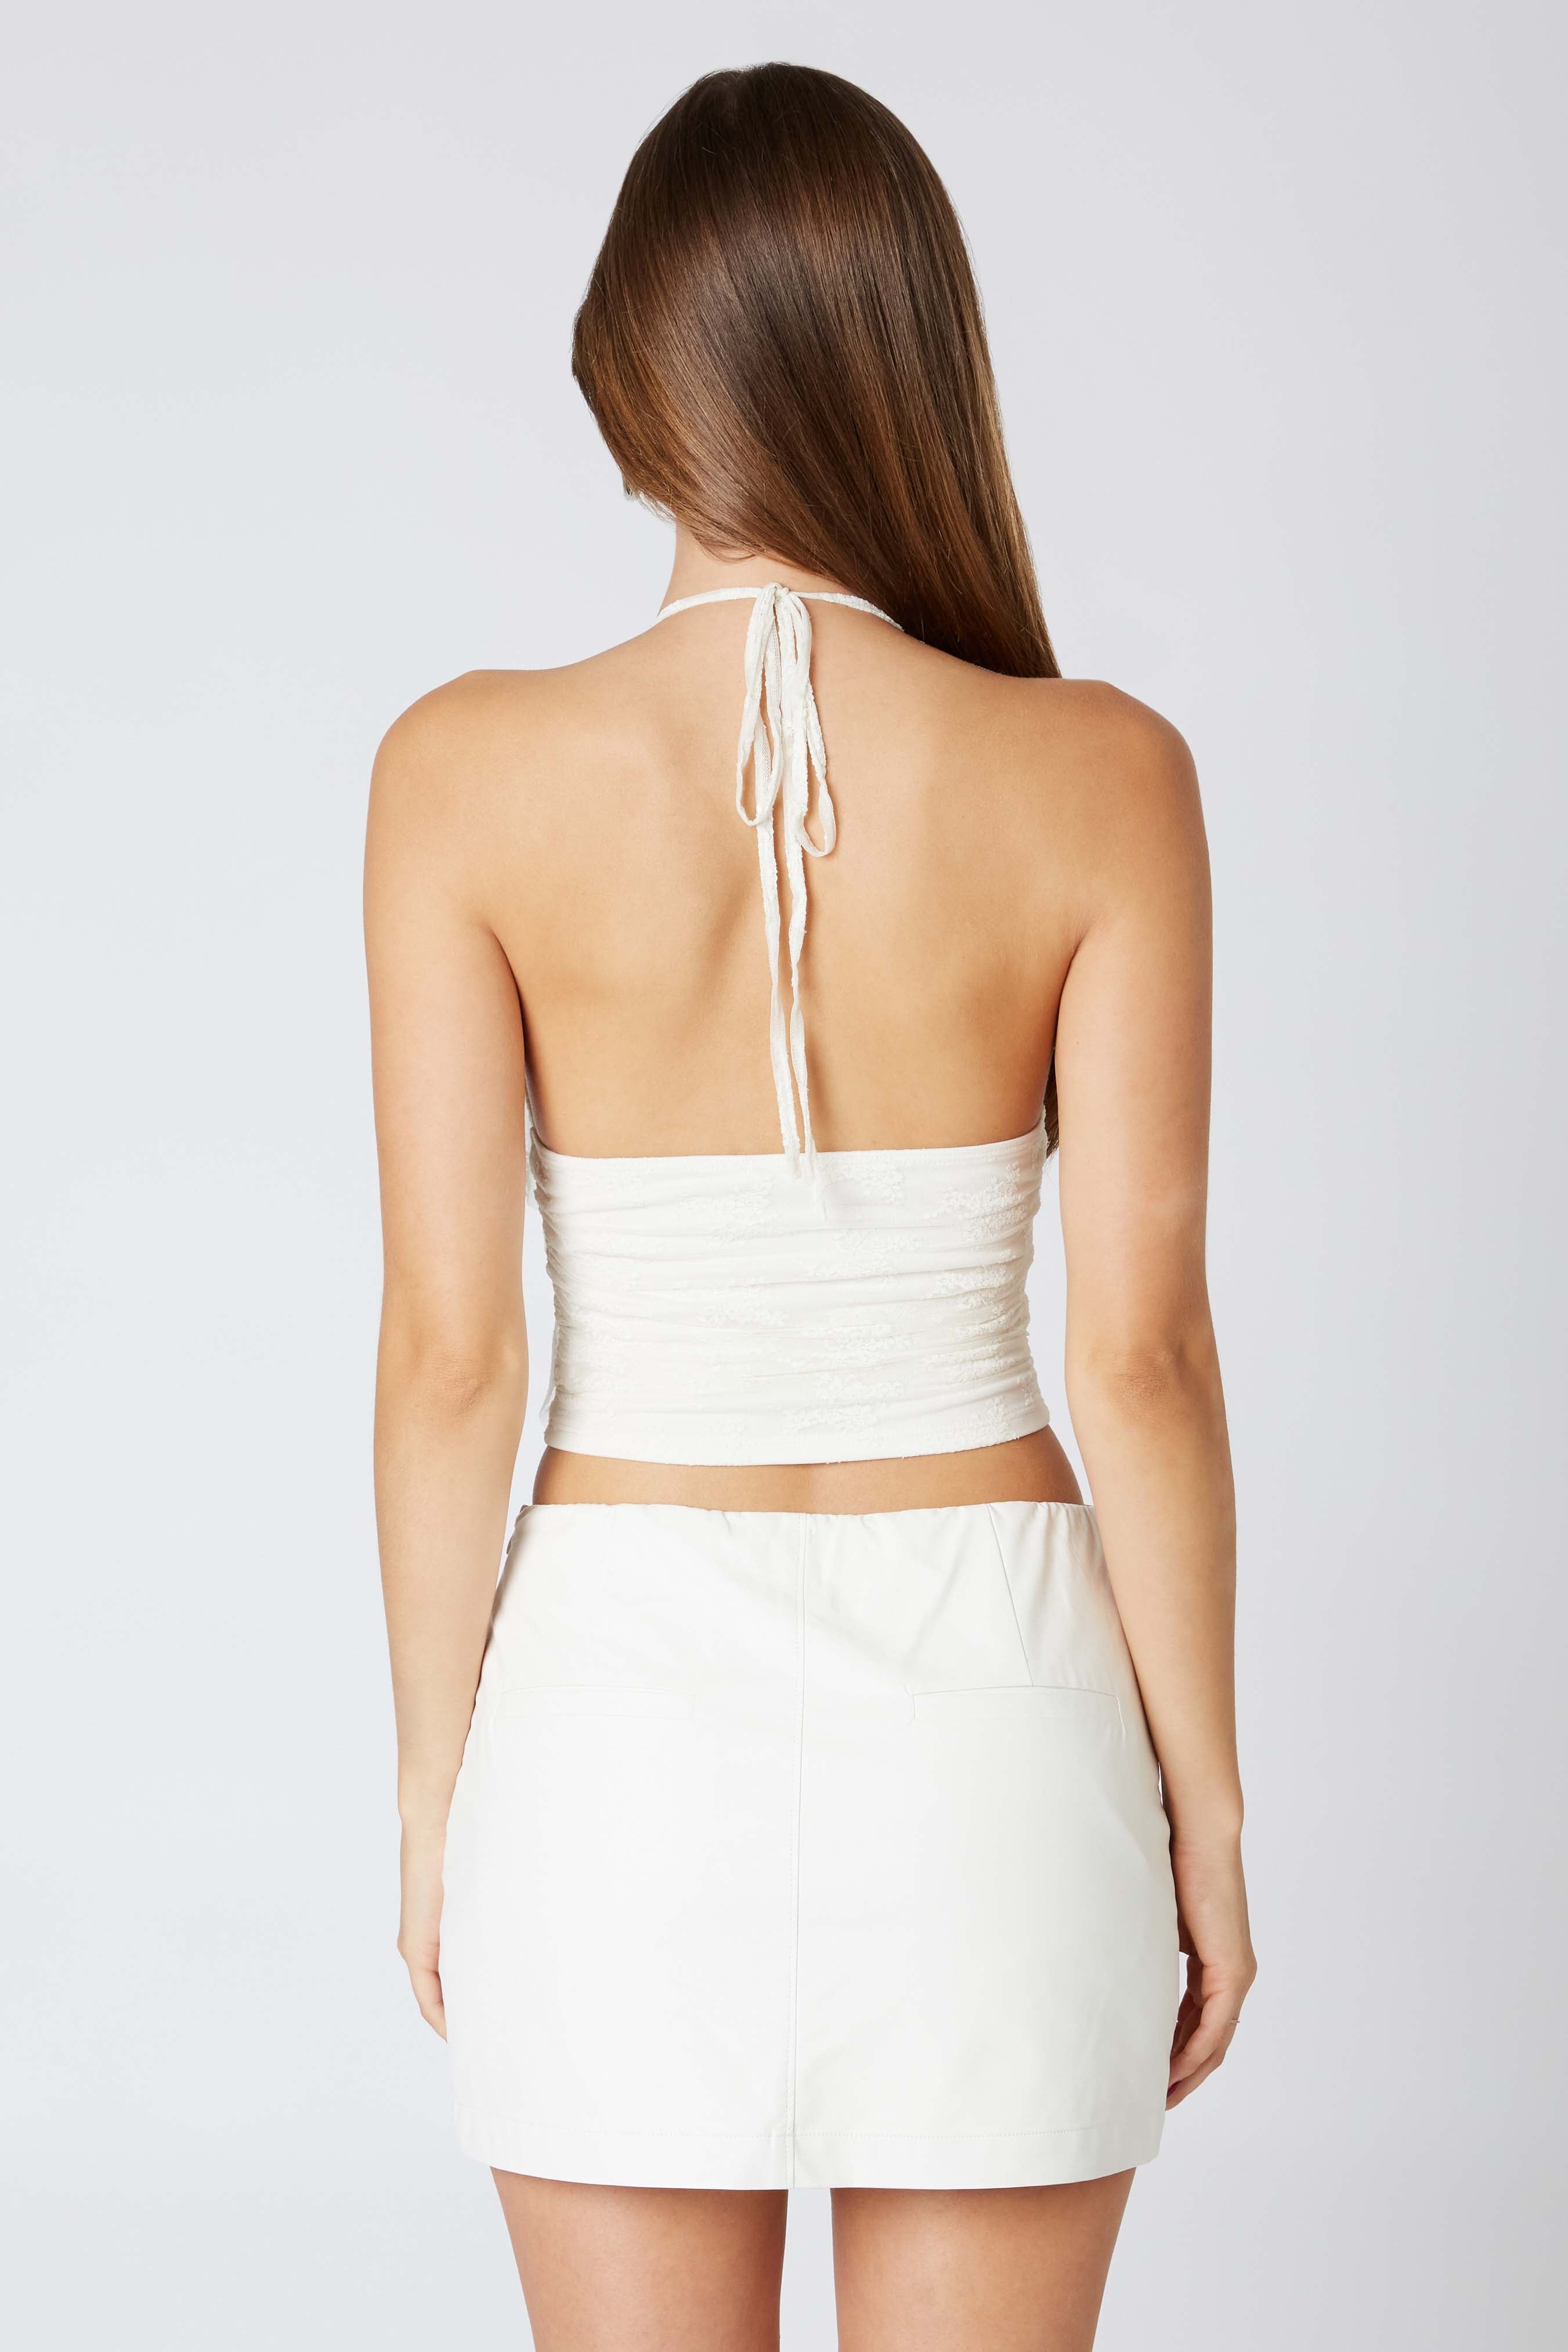 Lace Ruffle Halter Top in Ivory Back View